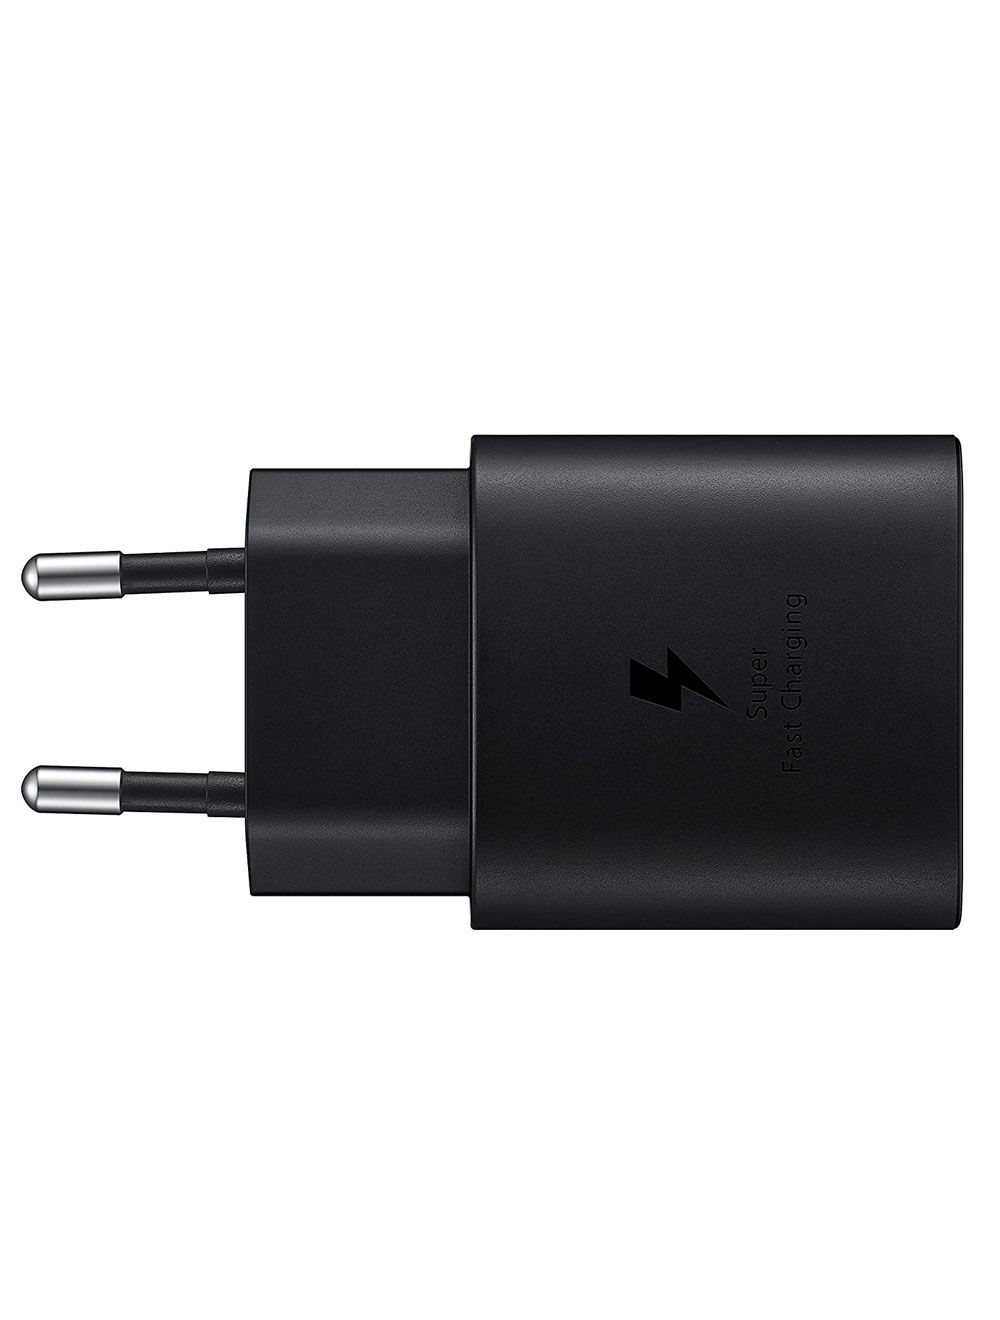 Samsung Wall Charger, 25 Watt, USB-C Port, Black - EP-TA800XBEGWW with USB Type-C to USB Type-C Cable, 1.8 Meters - EP-DX310JBEGWW